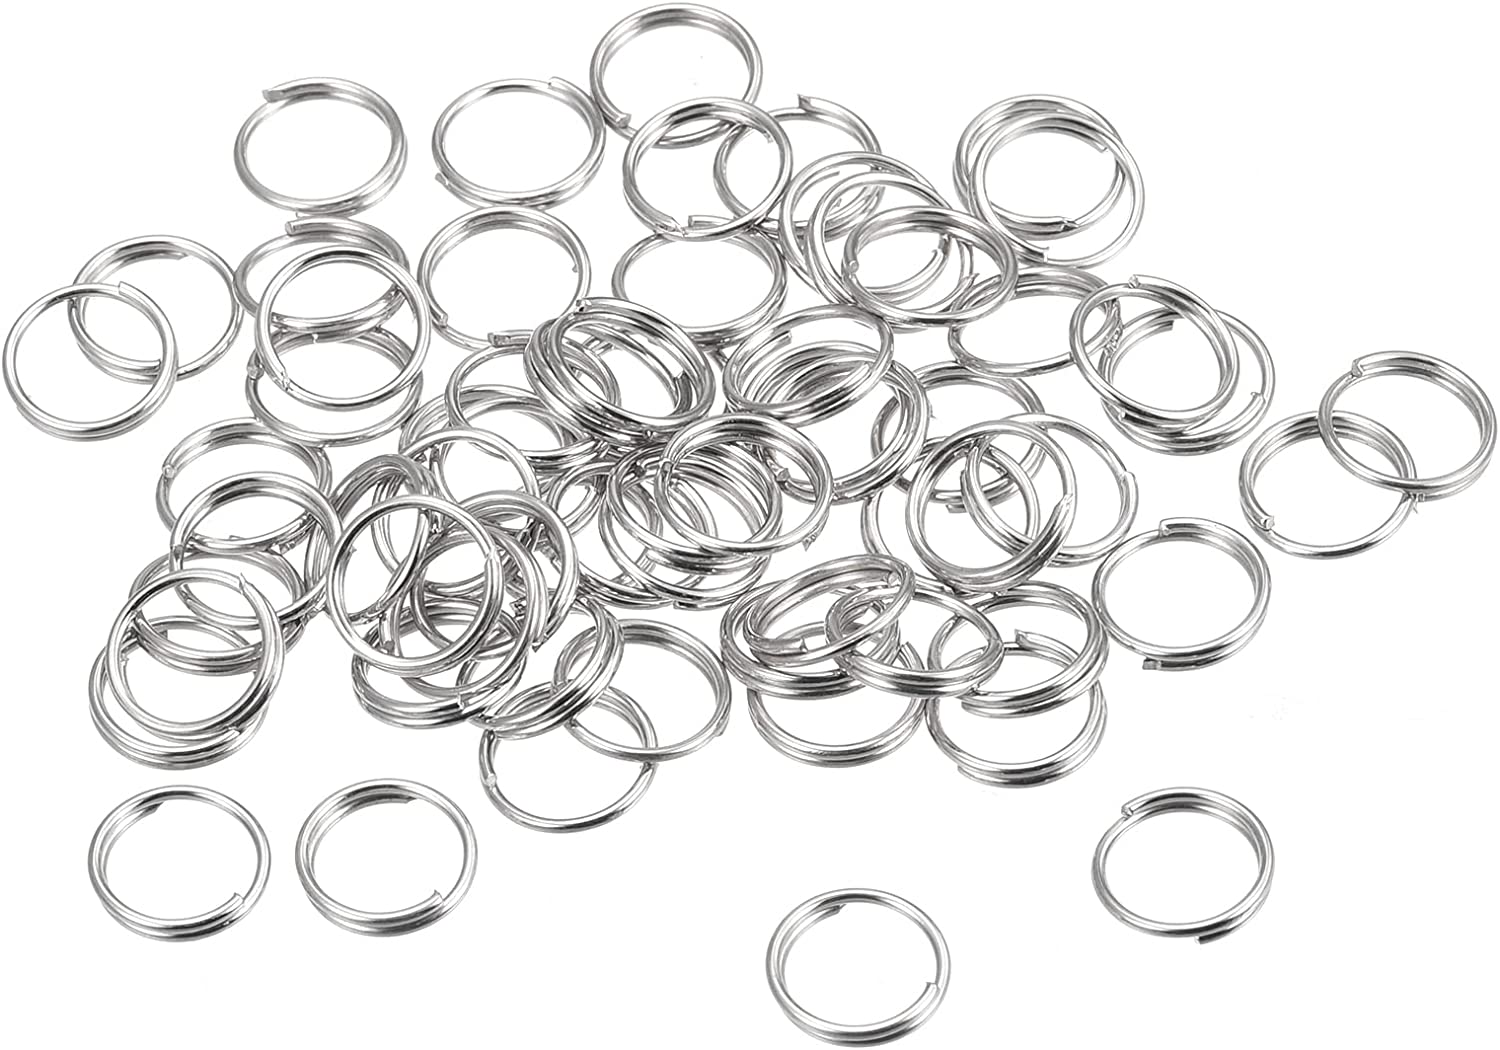 Double Loops Split Rings, 8mm Small Round Key Ring Parts for DIY Crafts  Making, Silver Tone 48Pcs